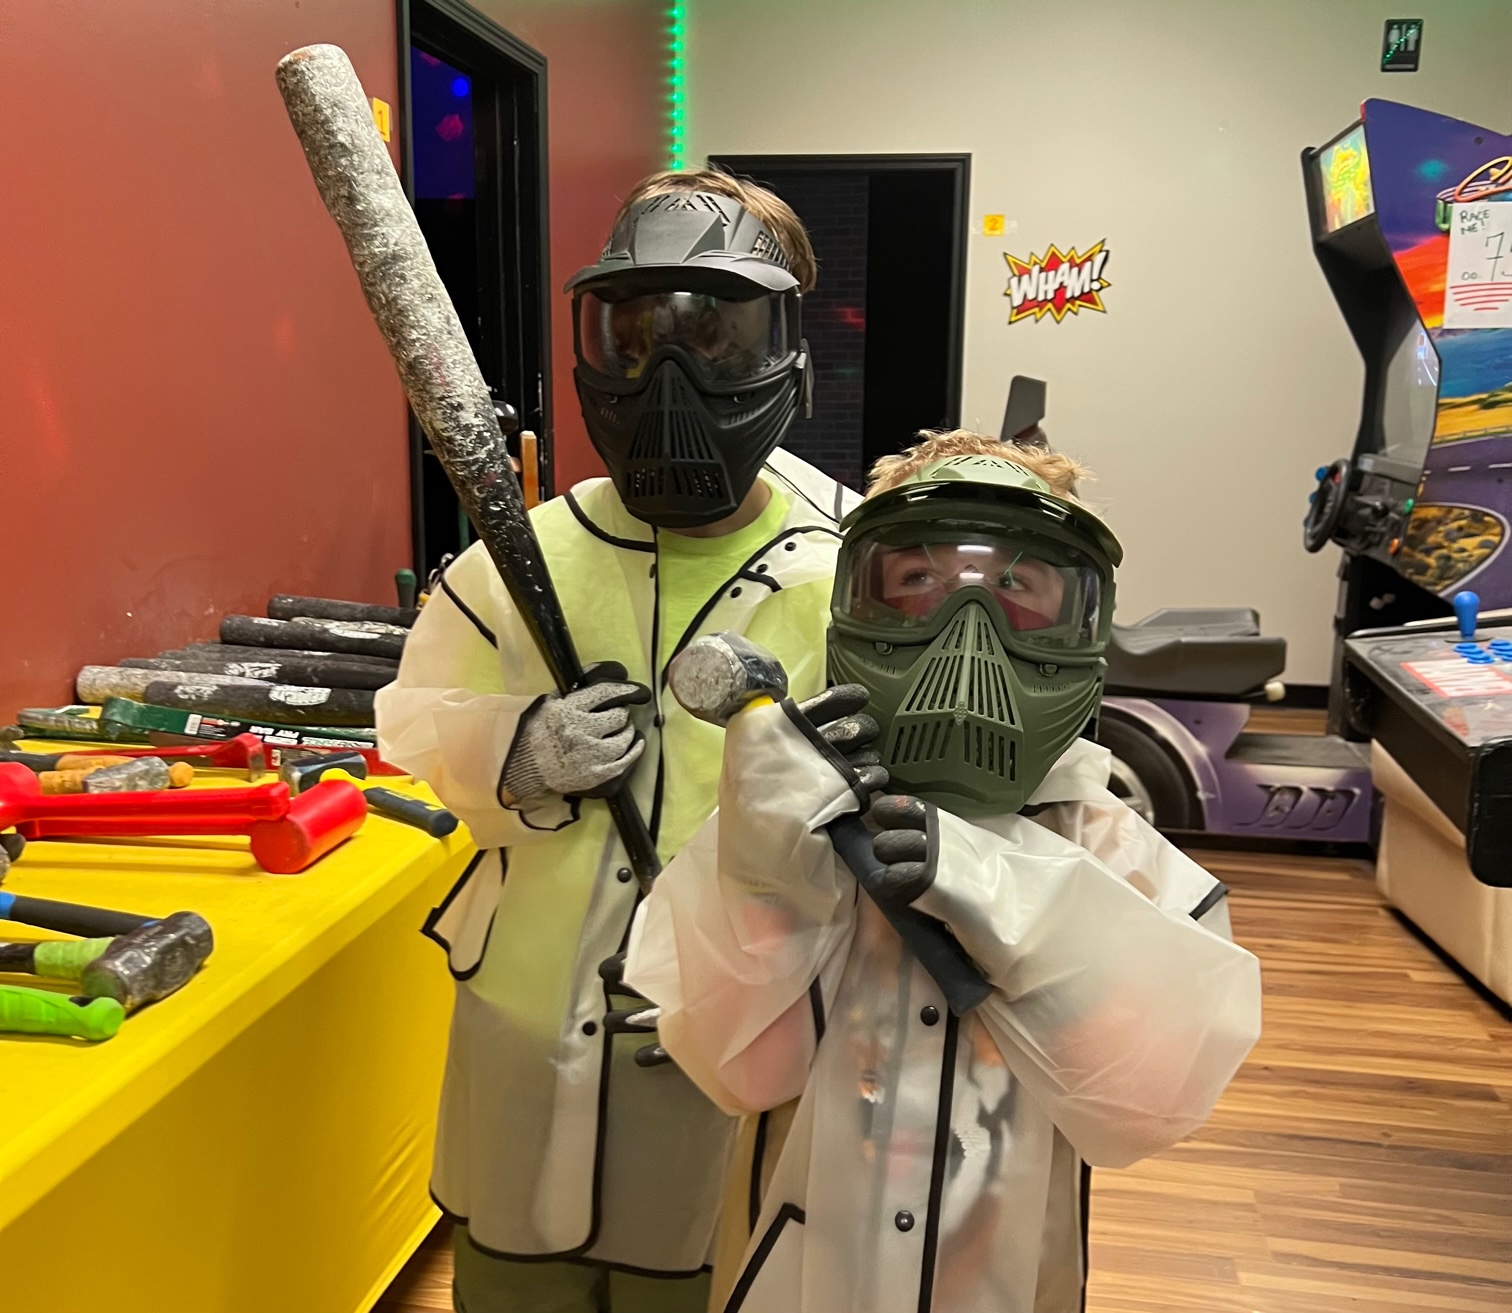 The author's two children are suited up for smashing things at Rage Room Champaign. Photo by Alyssa Buckley.